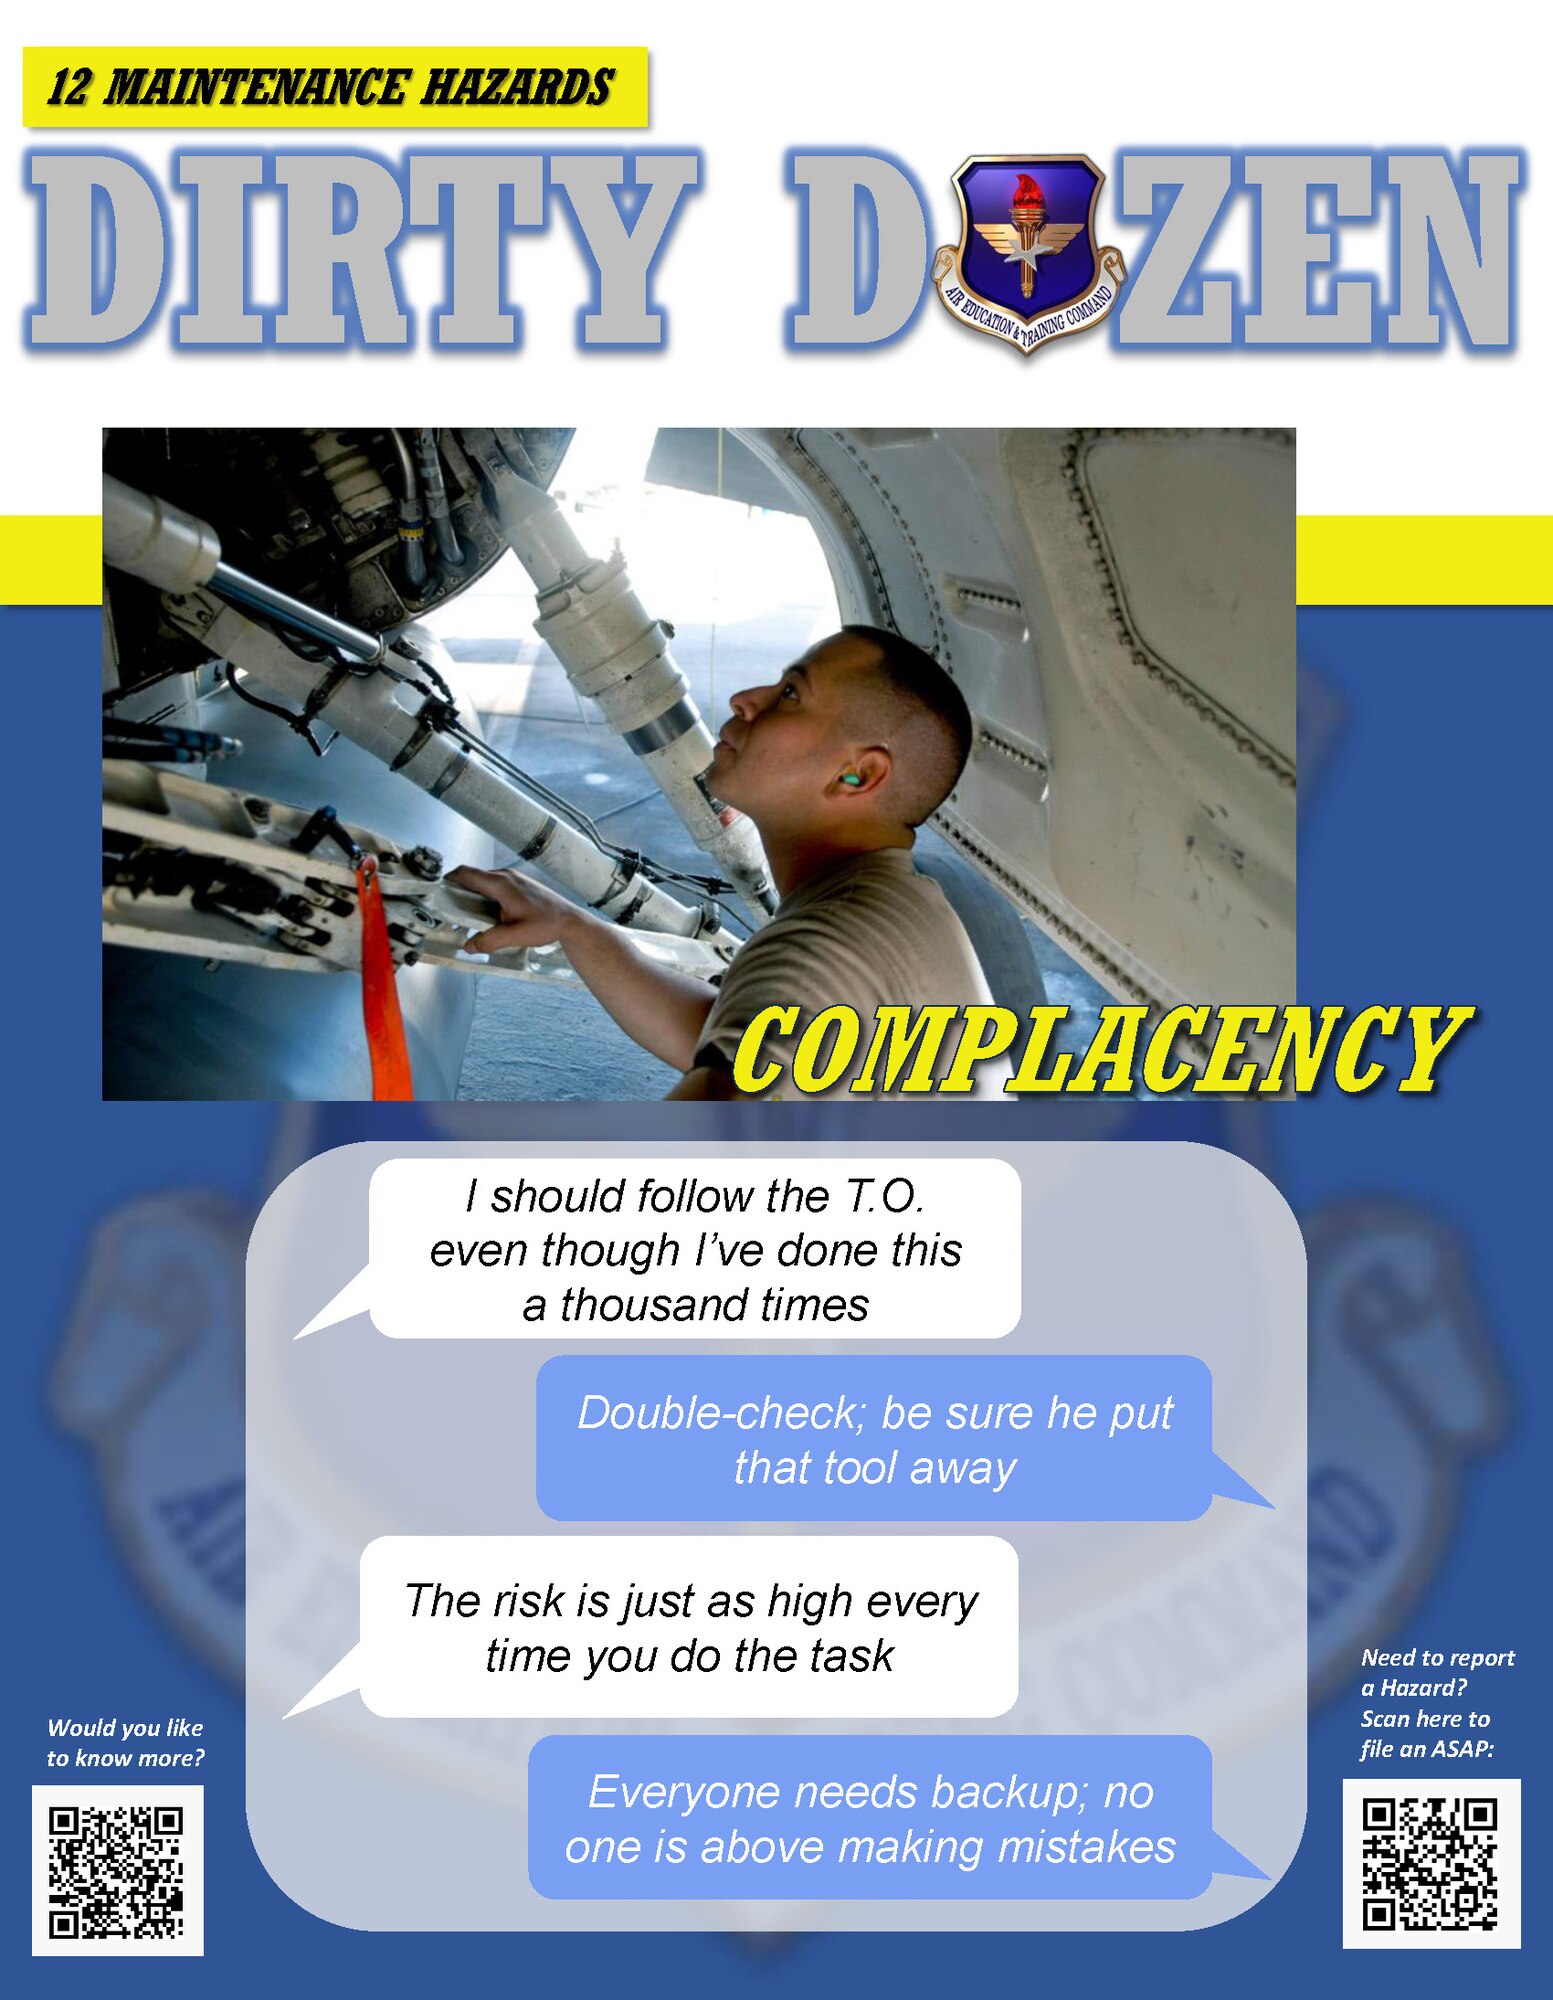 Complacency is one of the Dirty Dozen, which highlights common human error factors in aircraft maintenance mishaps.